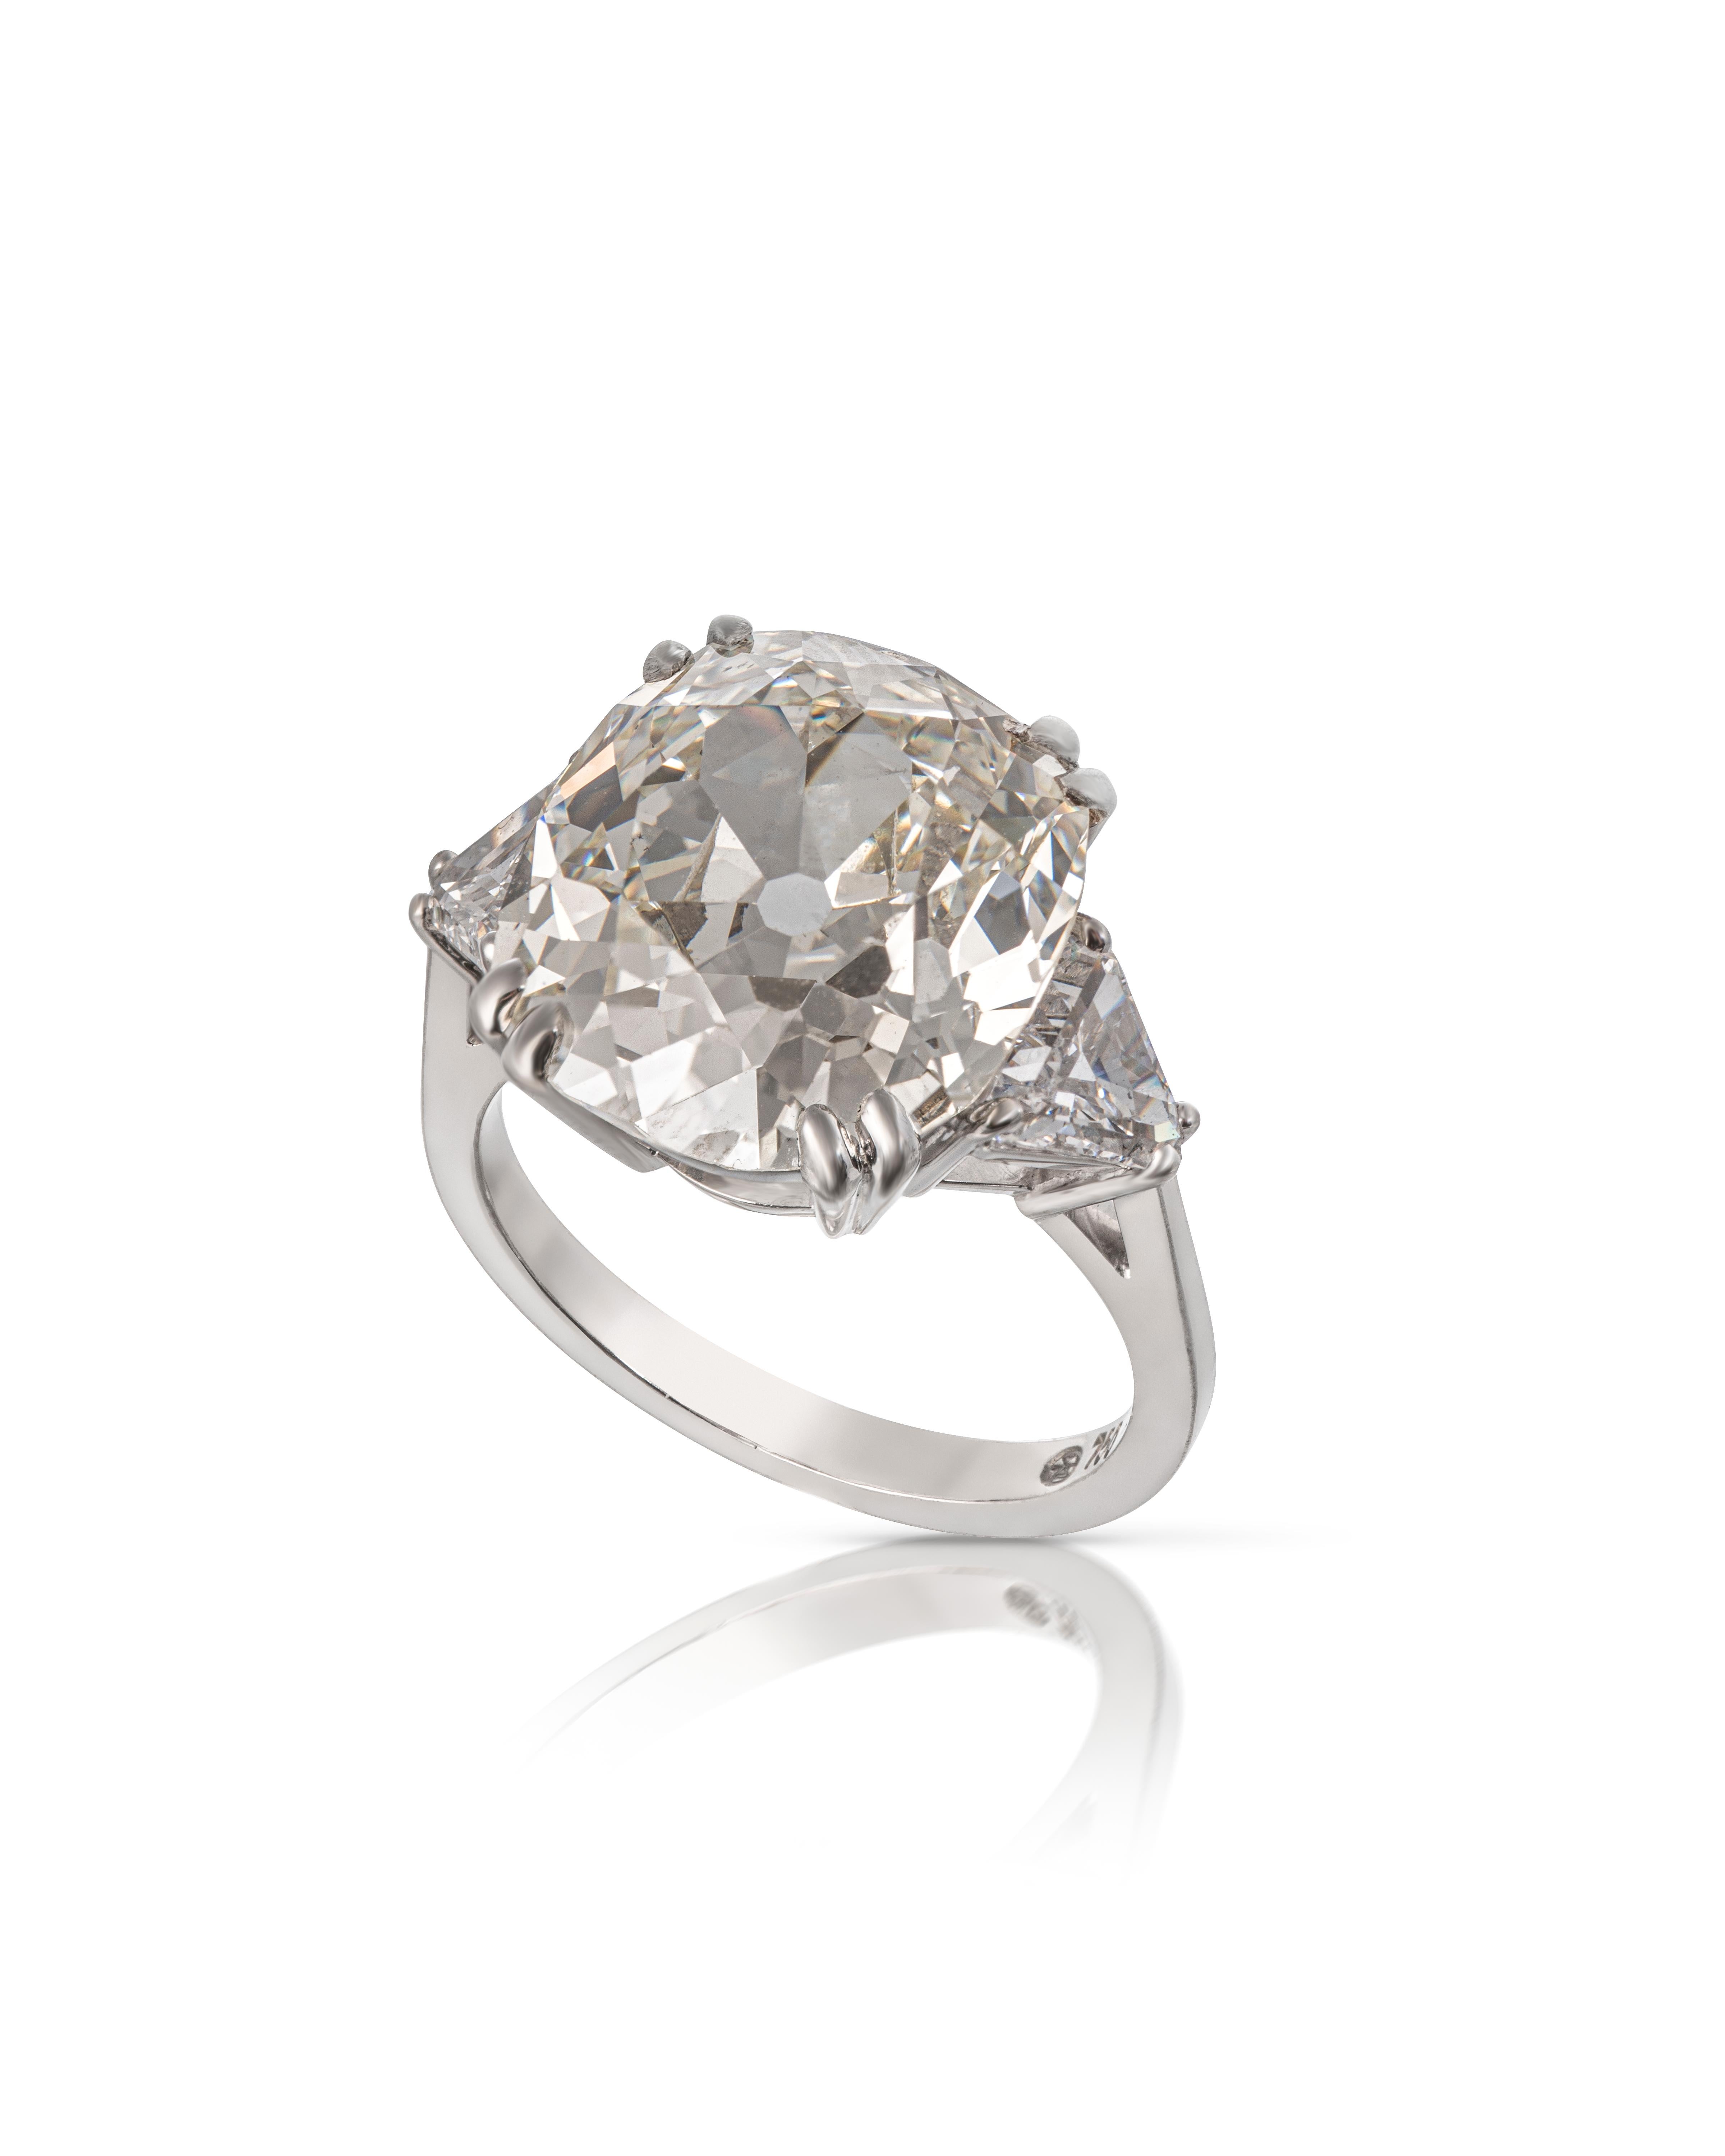 Contemporary GIA Certified 10.45 Carat Cushion Cut Diamond Ring For Sale